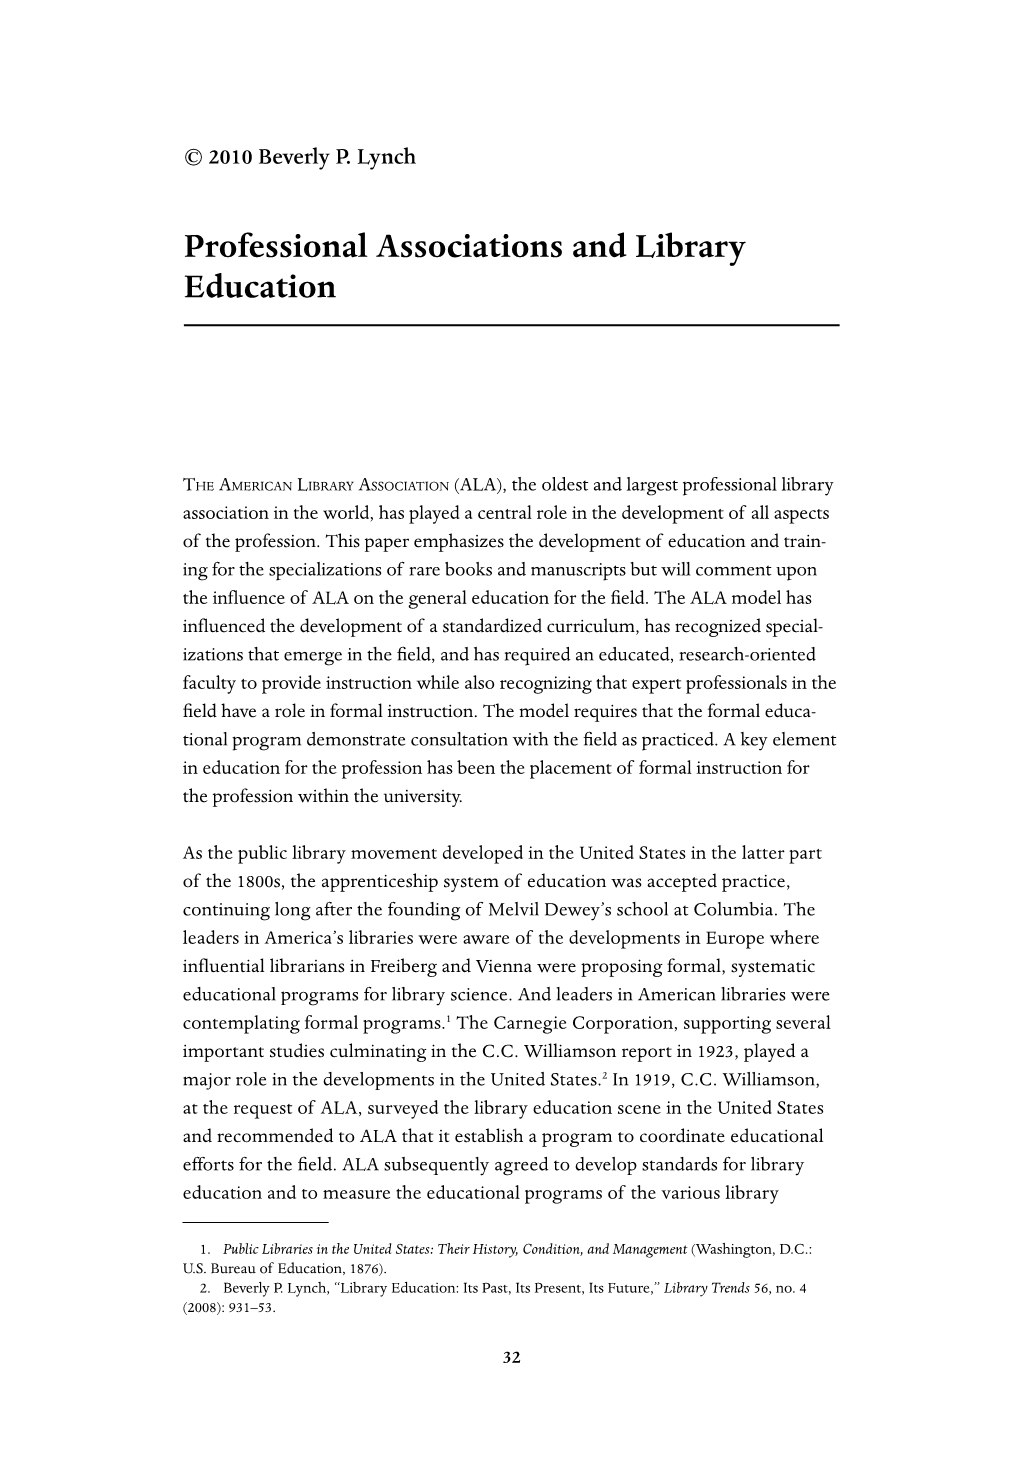 Professional Associations and Library Education